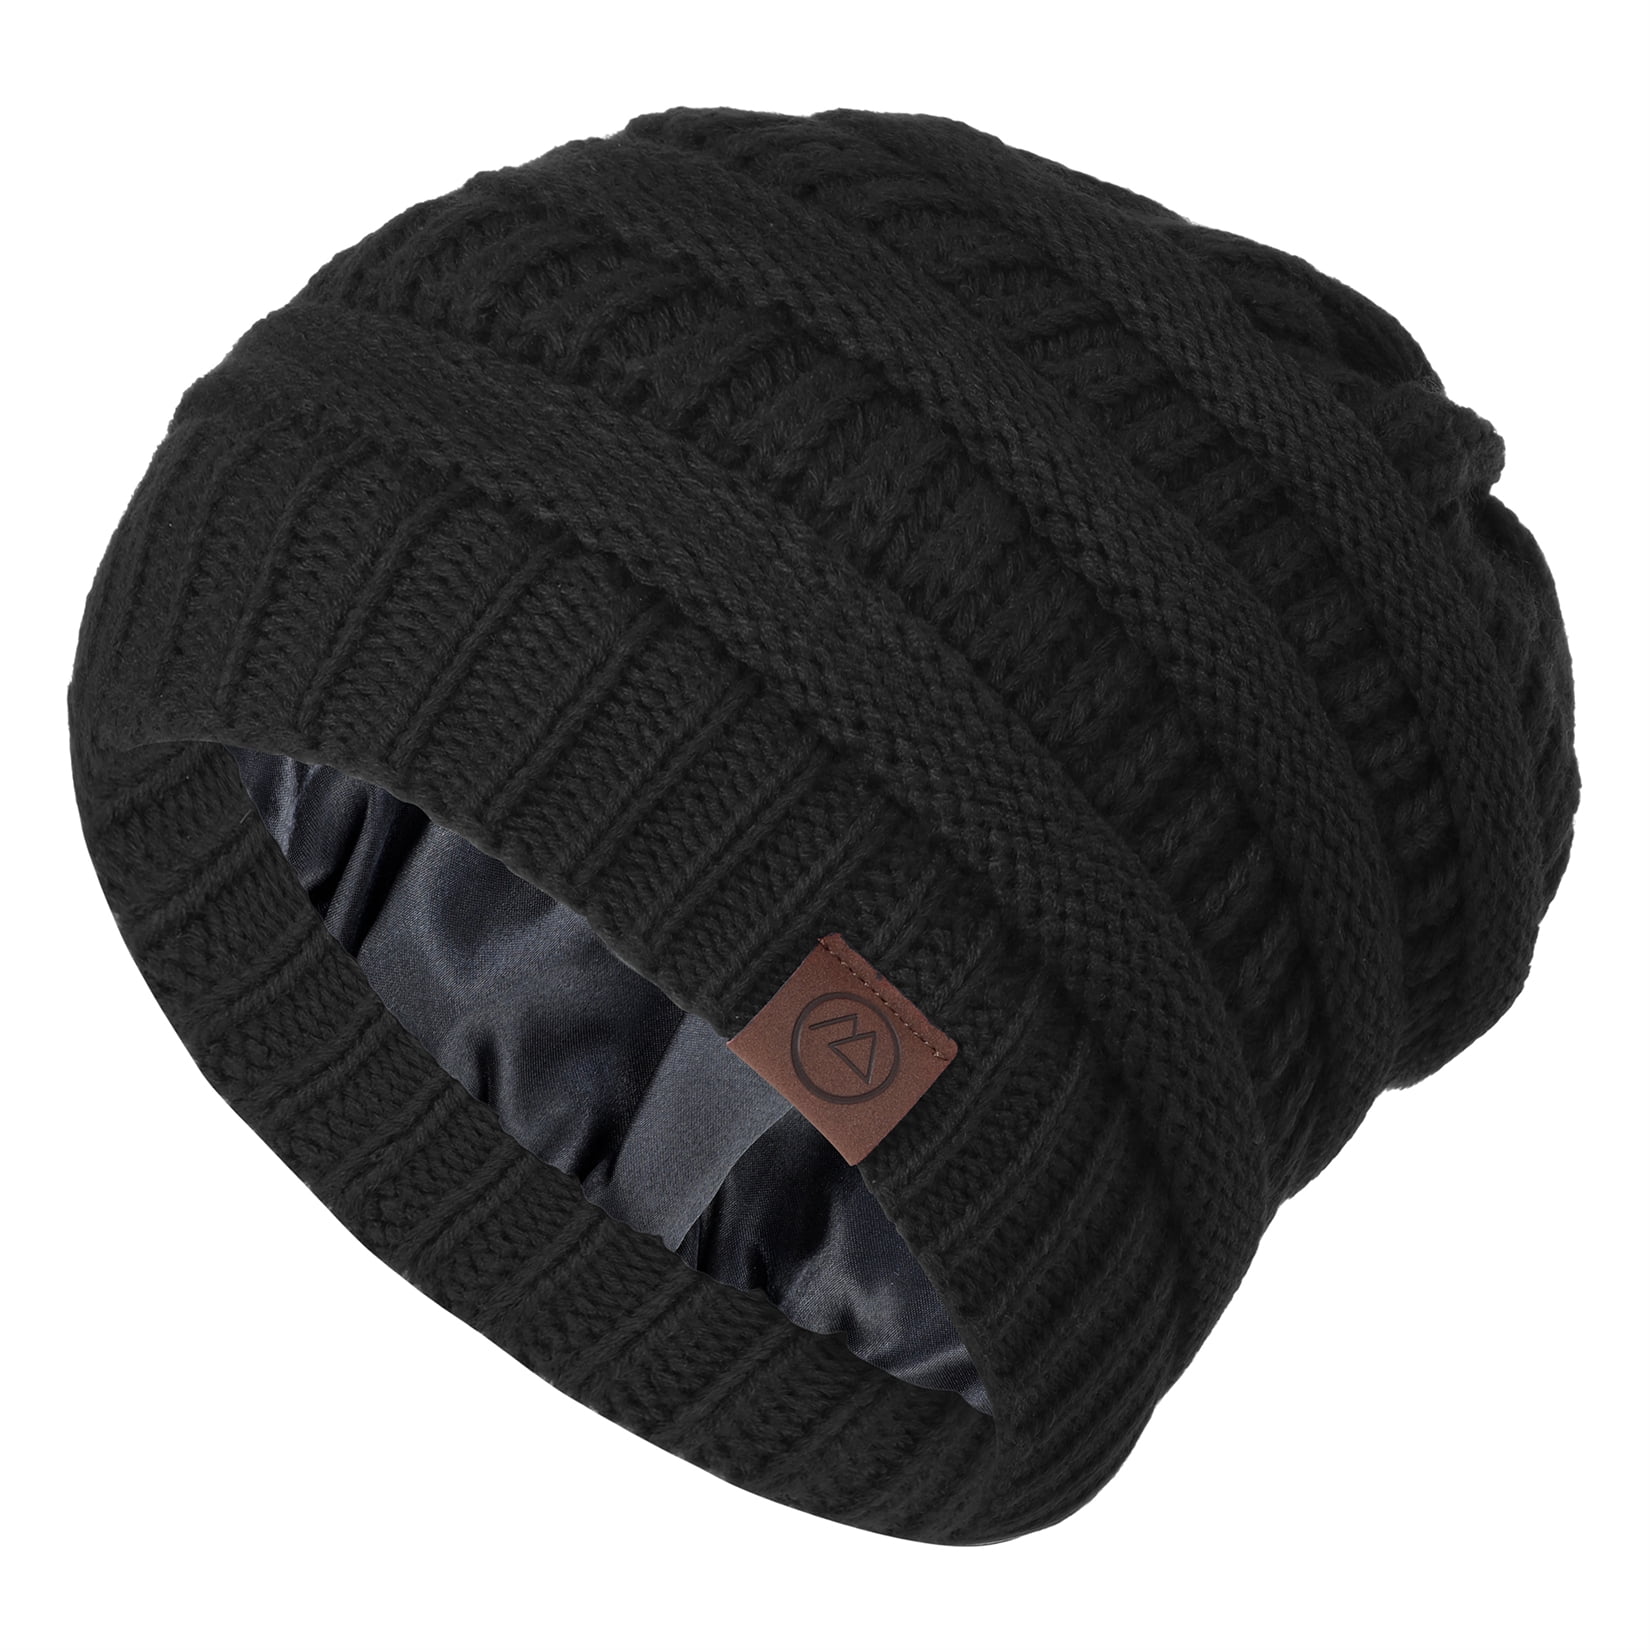 Zando CC Beanies for Women Cable Satin Lined Womens Beanies 